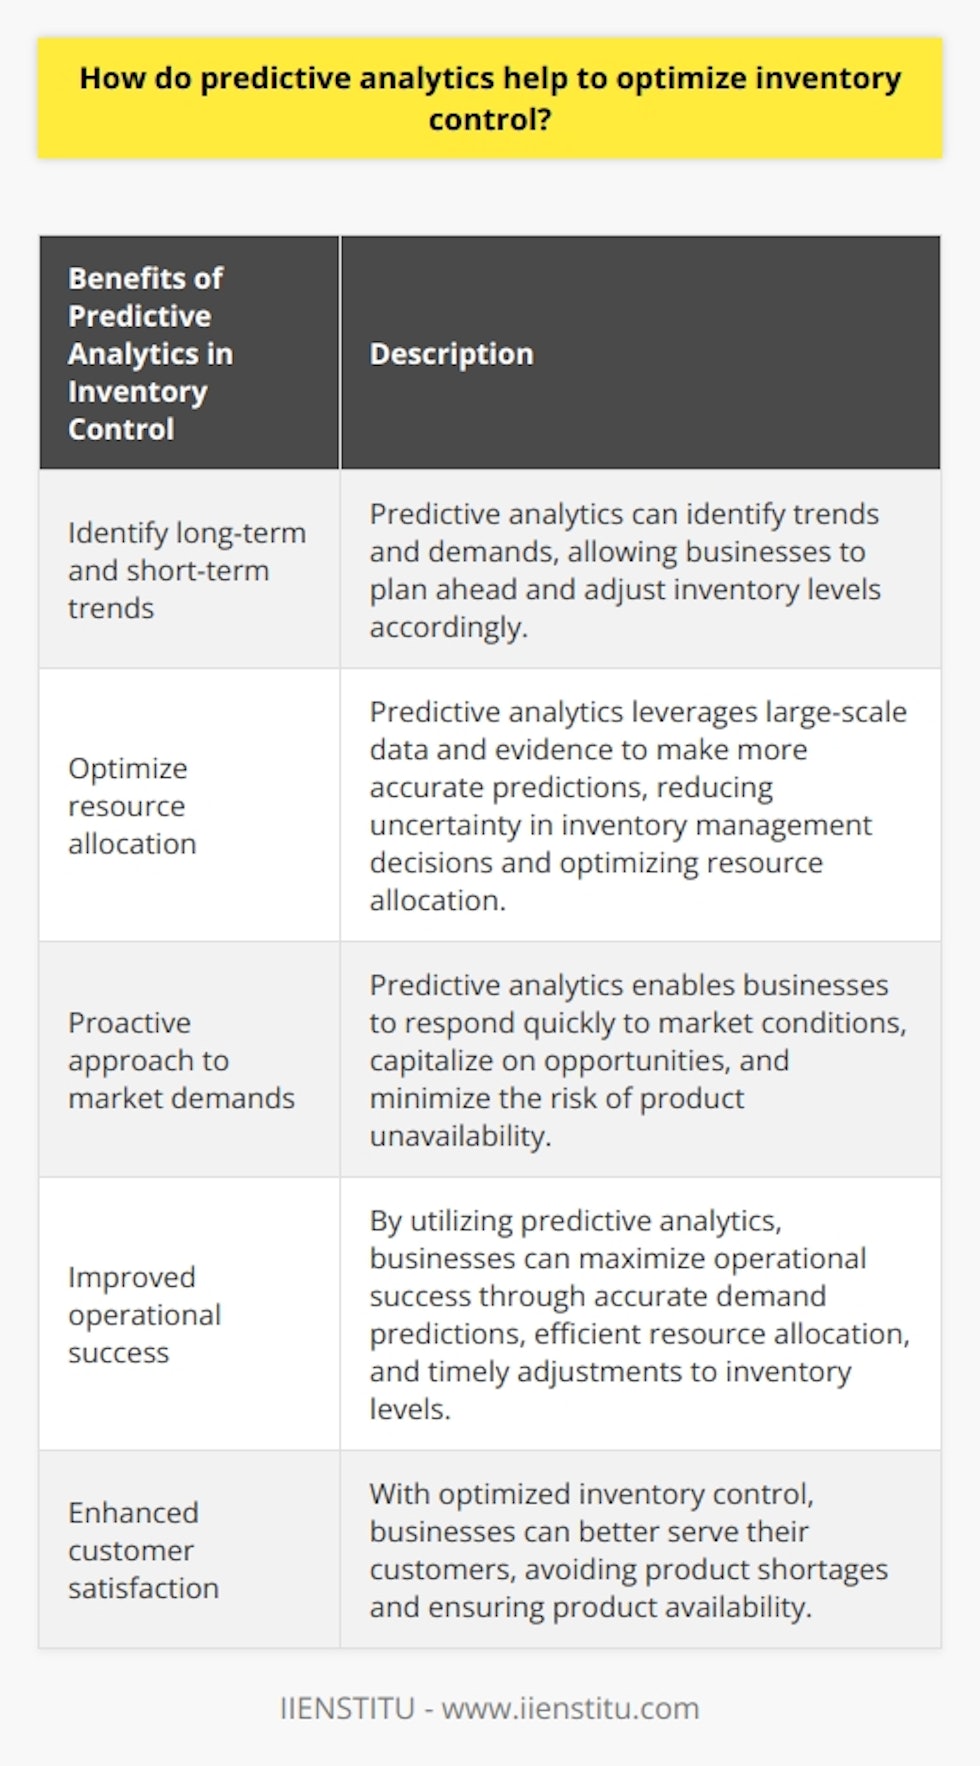 Predictive analytics plays a crucial role in optimizing inventory control by using data-driven insights to make informed decisions. By collecting and analyzing data from various sources, including sales histories, supply chain data, market conditions, and customer preferences, businesses can accurately assess future product demand and adjust inventory levels accordingly.One of the key advantages of predictive analytics in inventory control is its ability to identify long-term and short-term trends and demands. This allows businesses to anticipate potential problems, plan ahead, and make timely adjustments to inventory levels. By doing so, they can avoid overstocking or understocking, which can result in costly inefficiencies or missed sales opportunities.Another significant benefit of predictive analytics is its ability to optimize resource allocation. By leveraging large-scale data and evidence, predictions made through predictive analytics are more reliable and accurate, reducing uncertainty in inventory management decisions. This allows businesses to allocate resources more efficiently, ensuring that they have the necessary inventory to meet expected demand, while minimizing excess inventory and managing cash flow effectively.By adopting predictive analytics in inventory control, businesses can take a proactive approach to meet the demands of the marketplace. They can respond quickly to changing market conditions, capitalize on opportunities, and minimize the risk of product unavailability. This translates to improved operational success and customer satisfaction.In conclusion, predictive analytics is a powerful tool that helps businesses optimize their inventory control. By leveraging data-driven insights, businesses can make more accurate predictions about future product demand, adjust inventory levels accordingly, and allocate resources more efficiently. This proactive approach enables businesses to maximize operational success and better serve their customers.